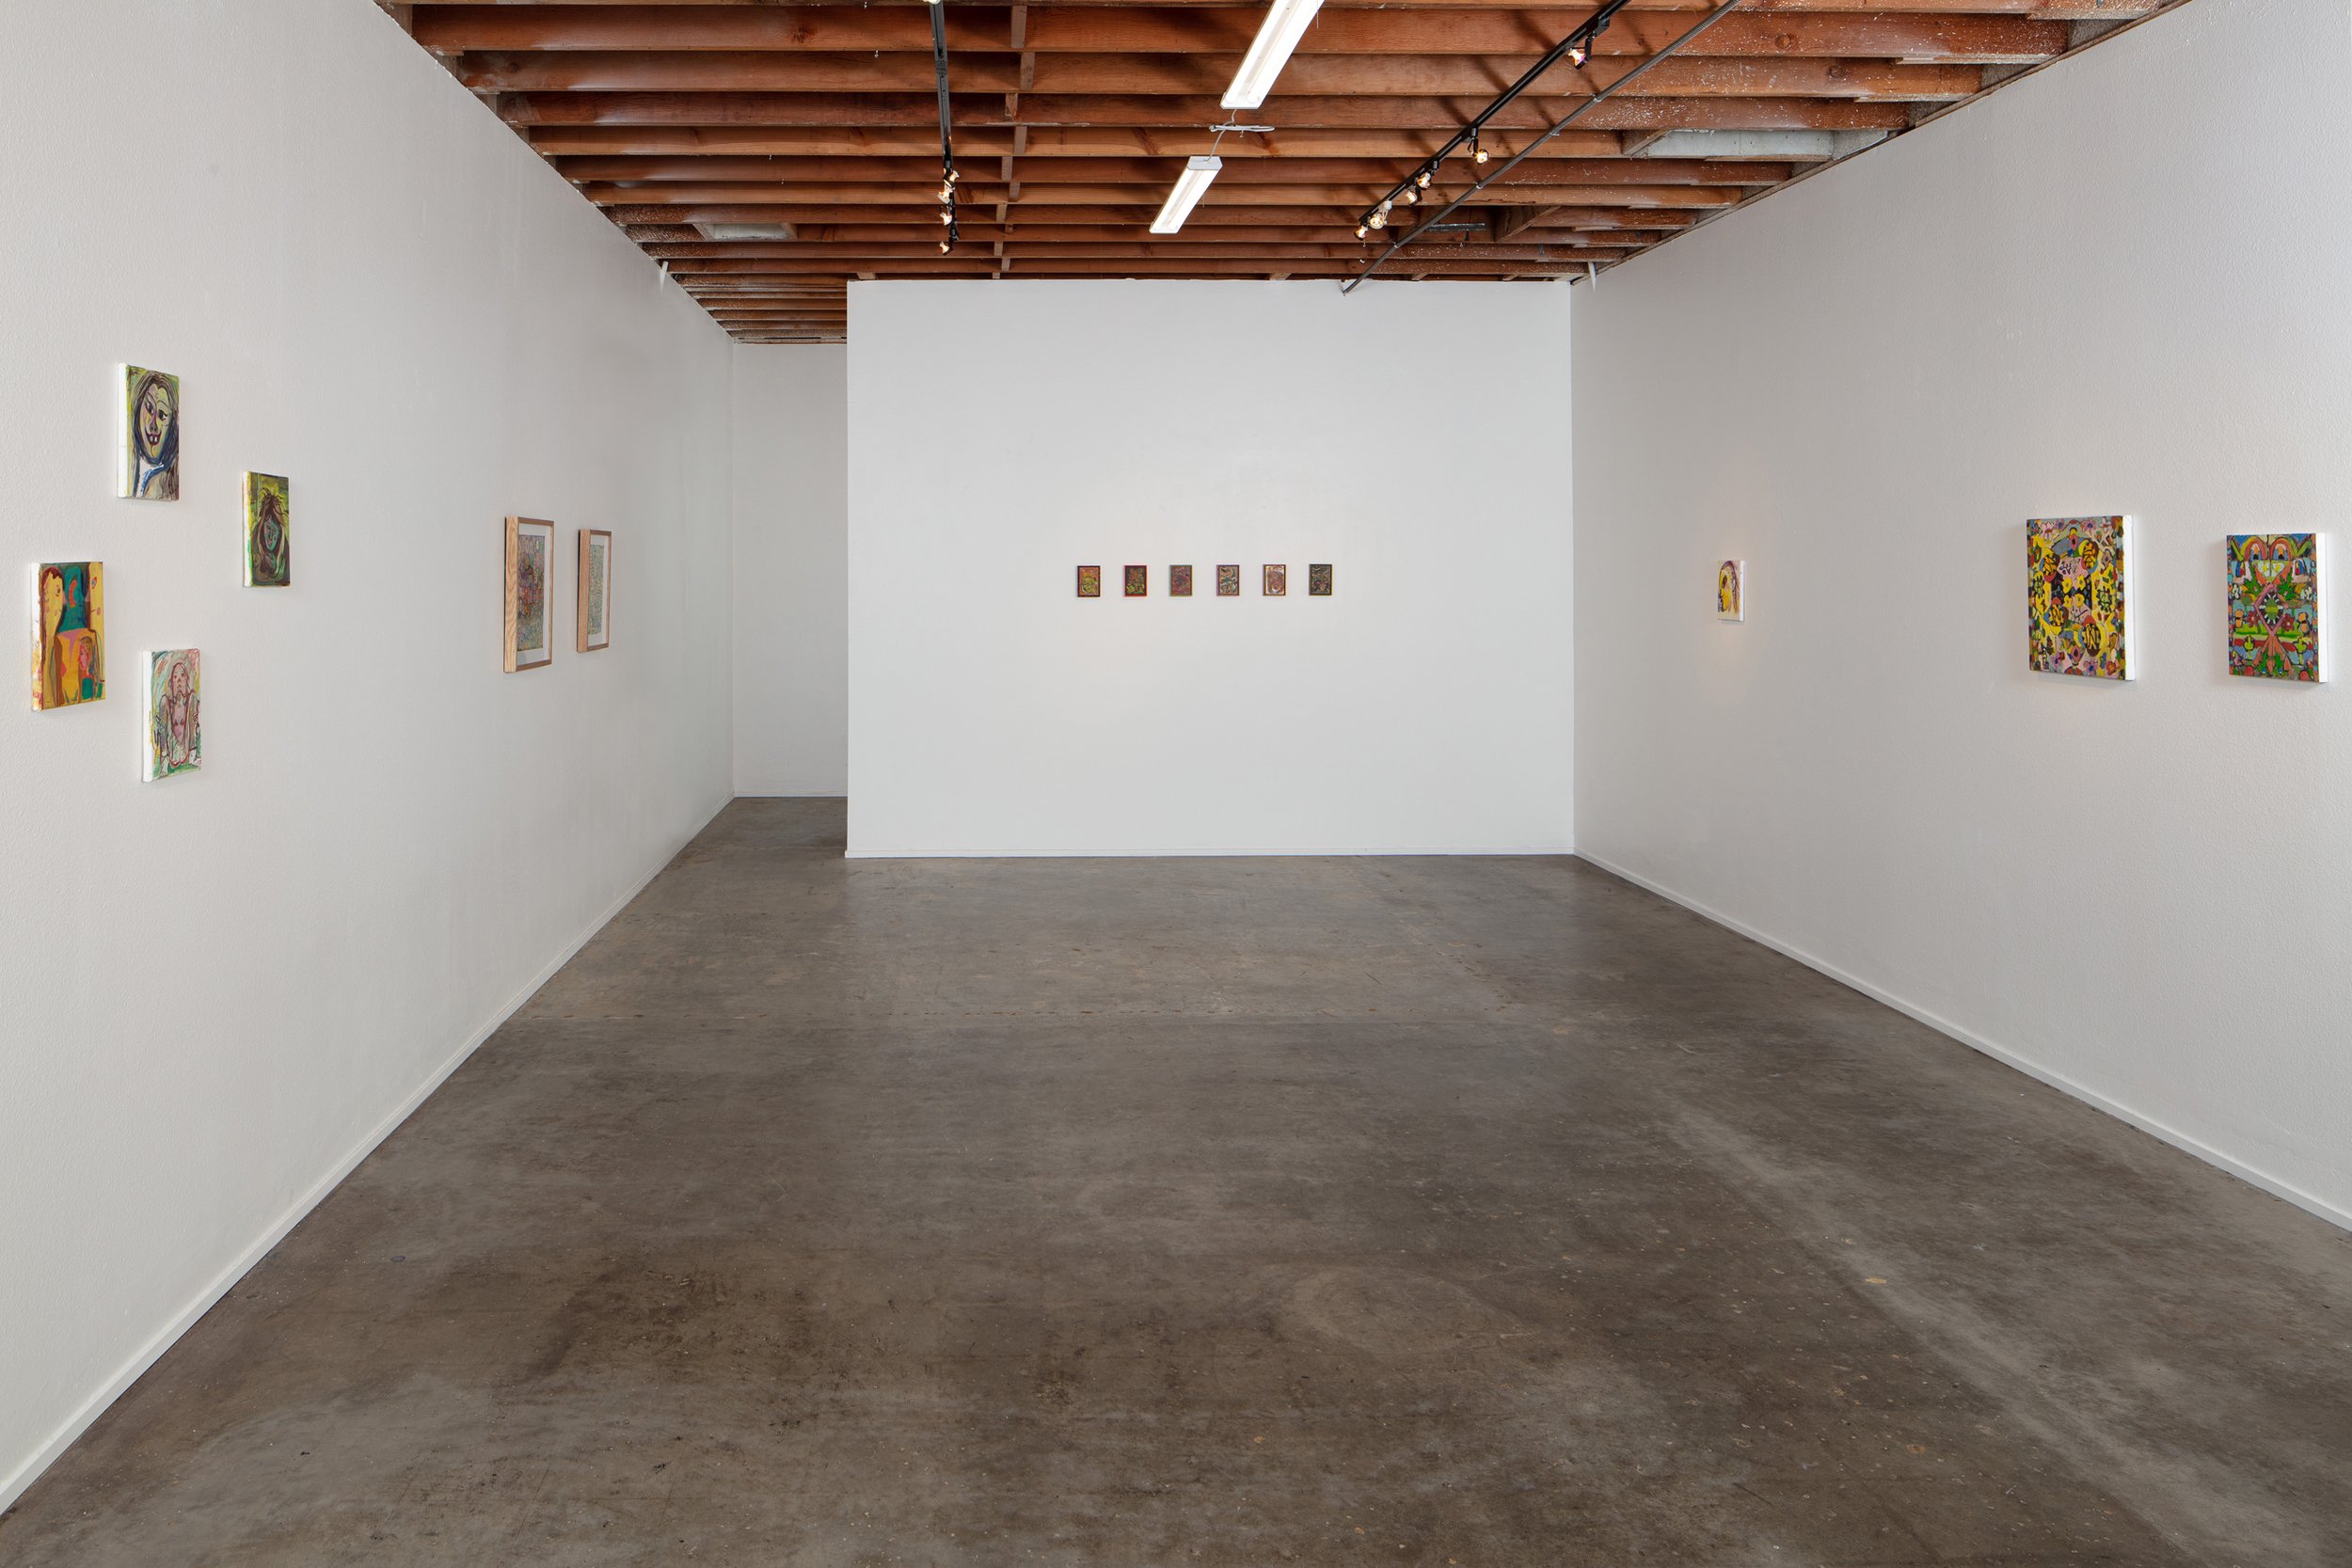  2021, Left Field Gallery, Los Osos, CA. Group Show 